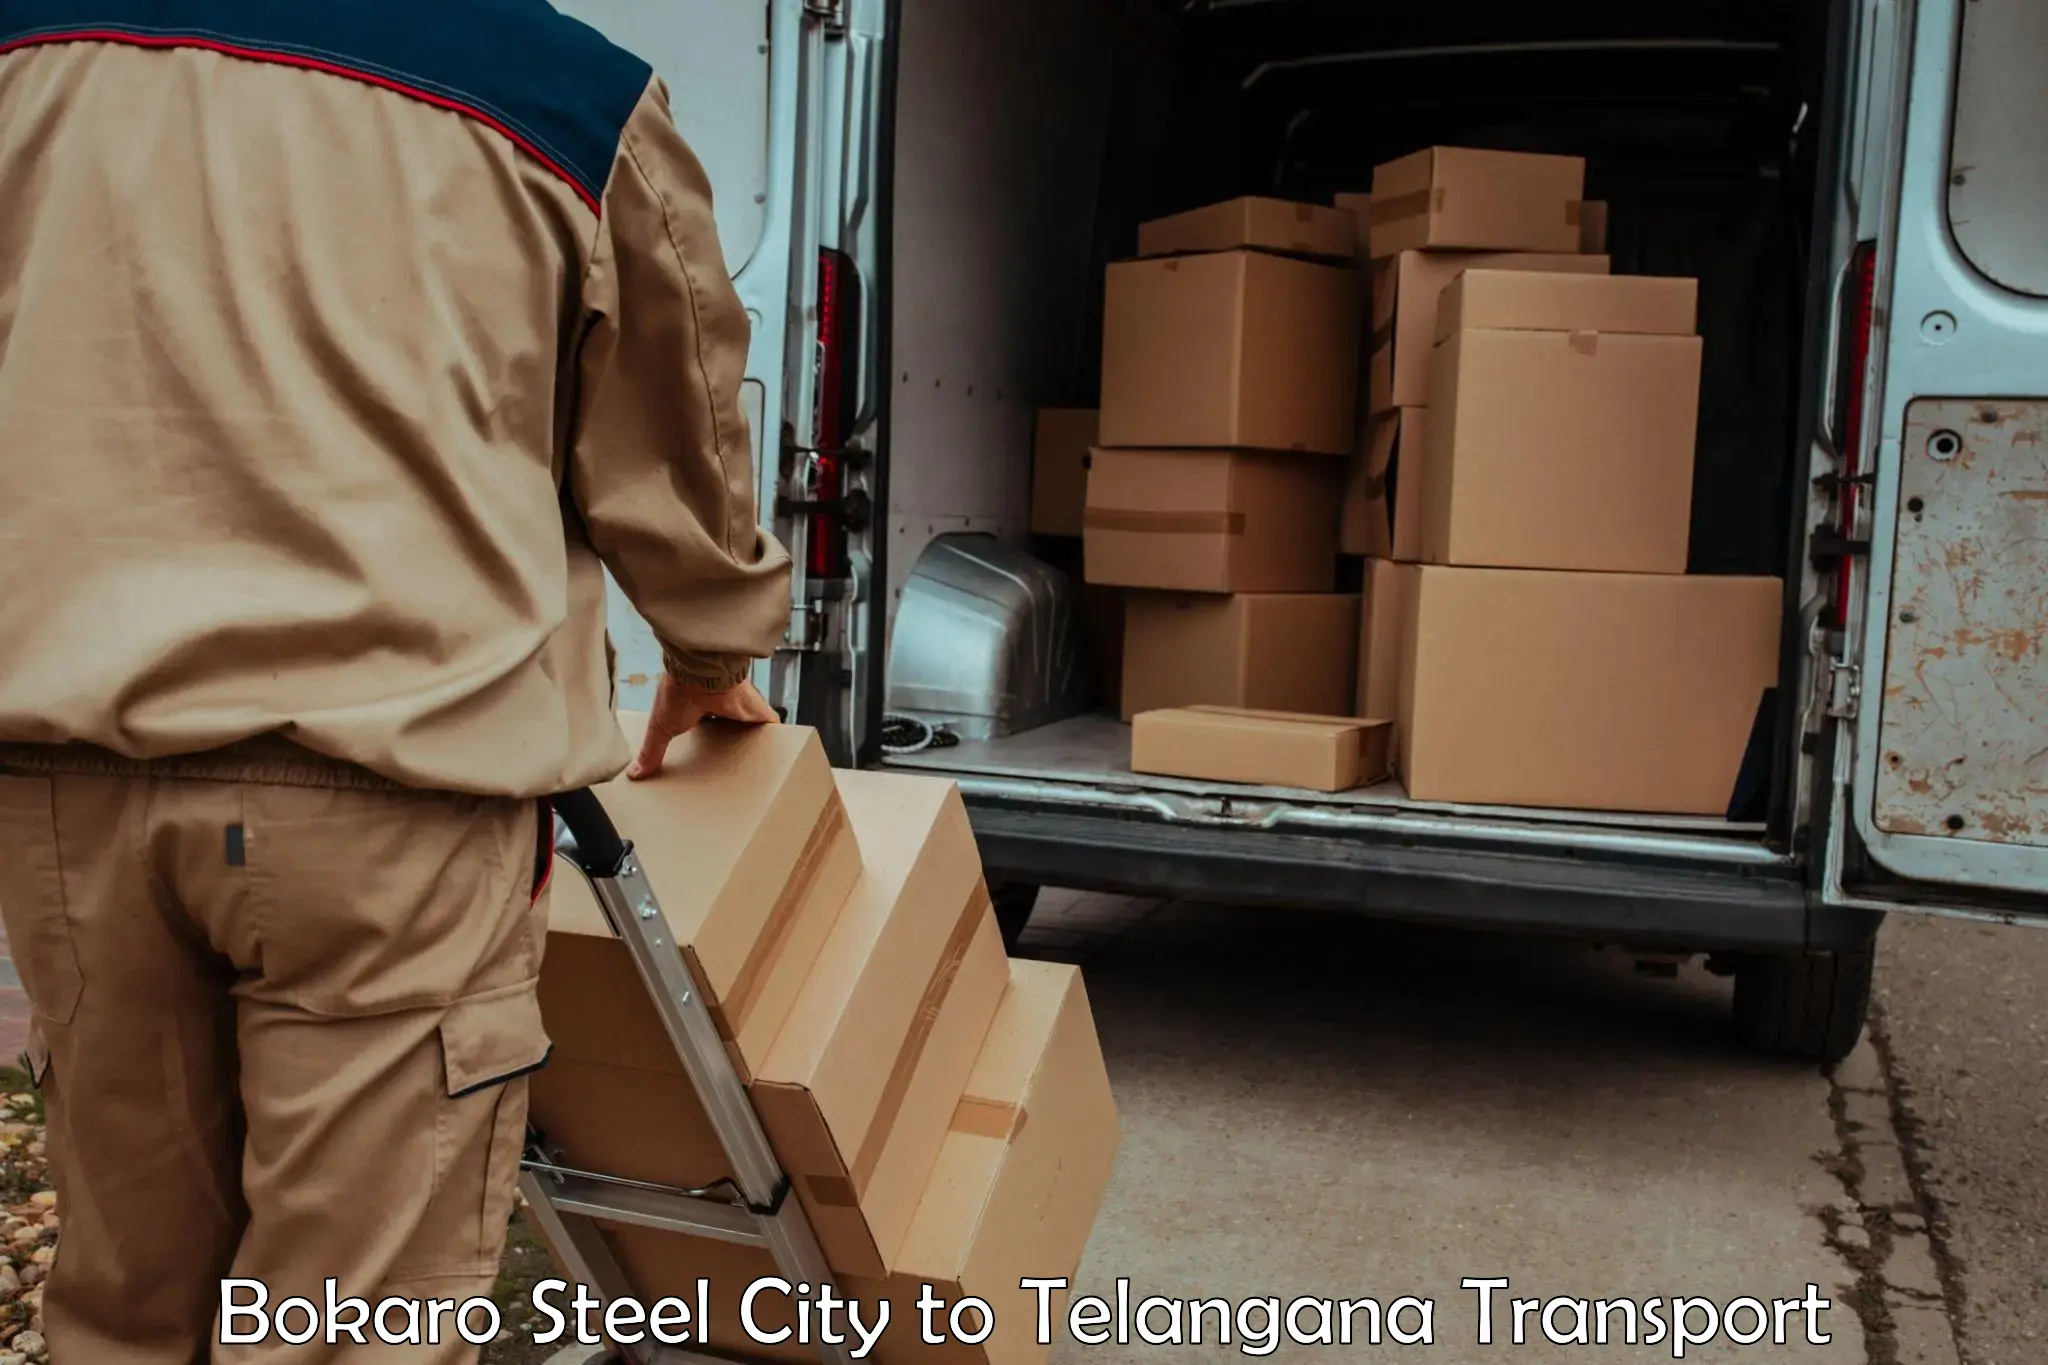 Air freight transport services Bokaro Steel City to Narayanpet